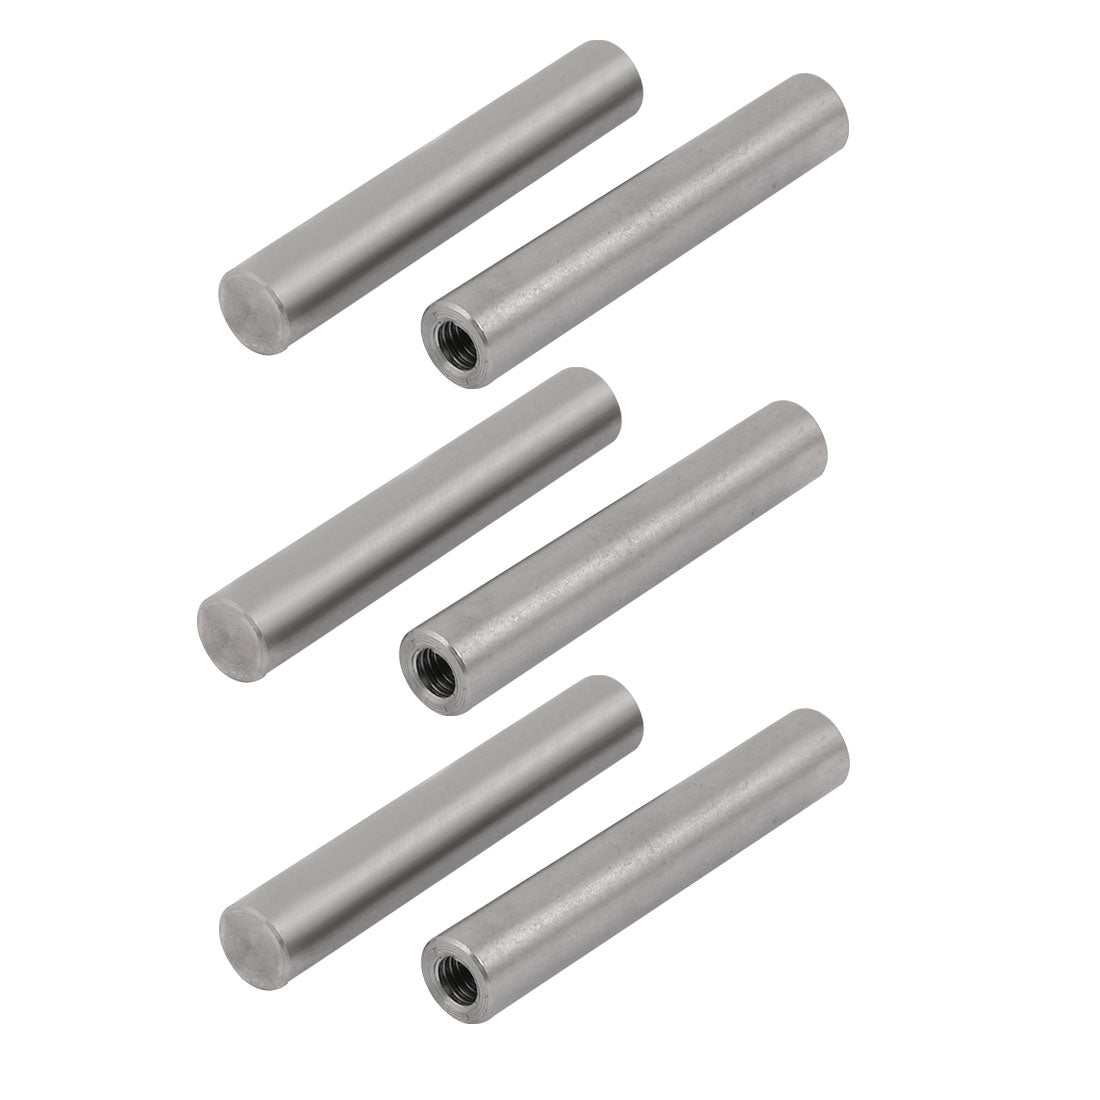 uxcell Uxcell 304 Stainless Steel M6 Female Thread 10mm x 60mm Cylindrical Dowel Pin 6pcs